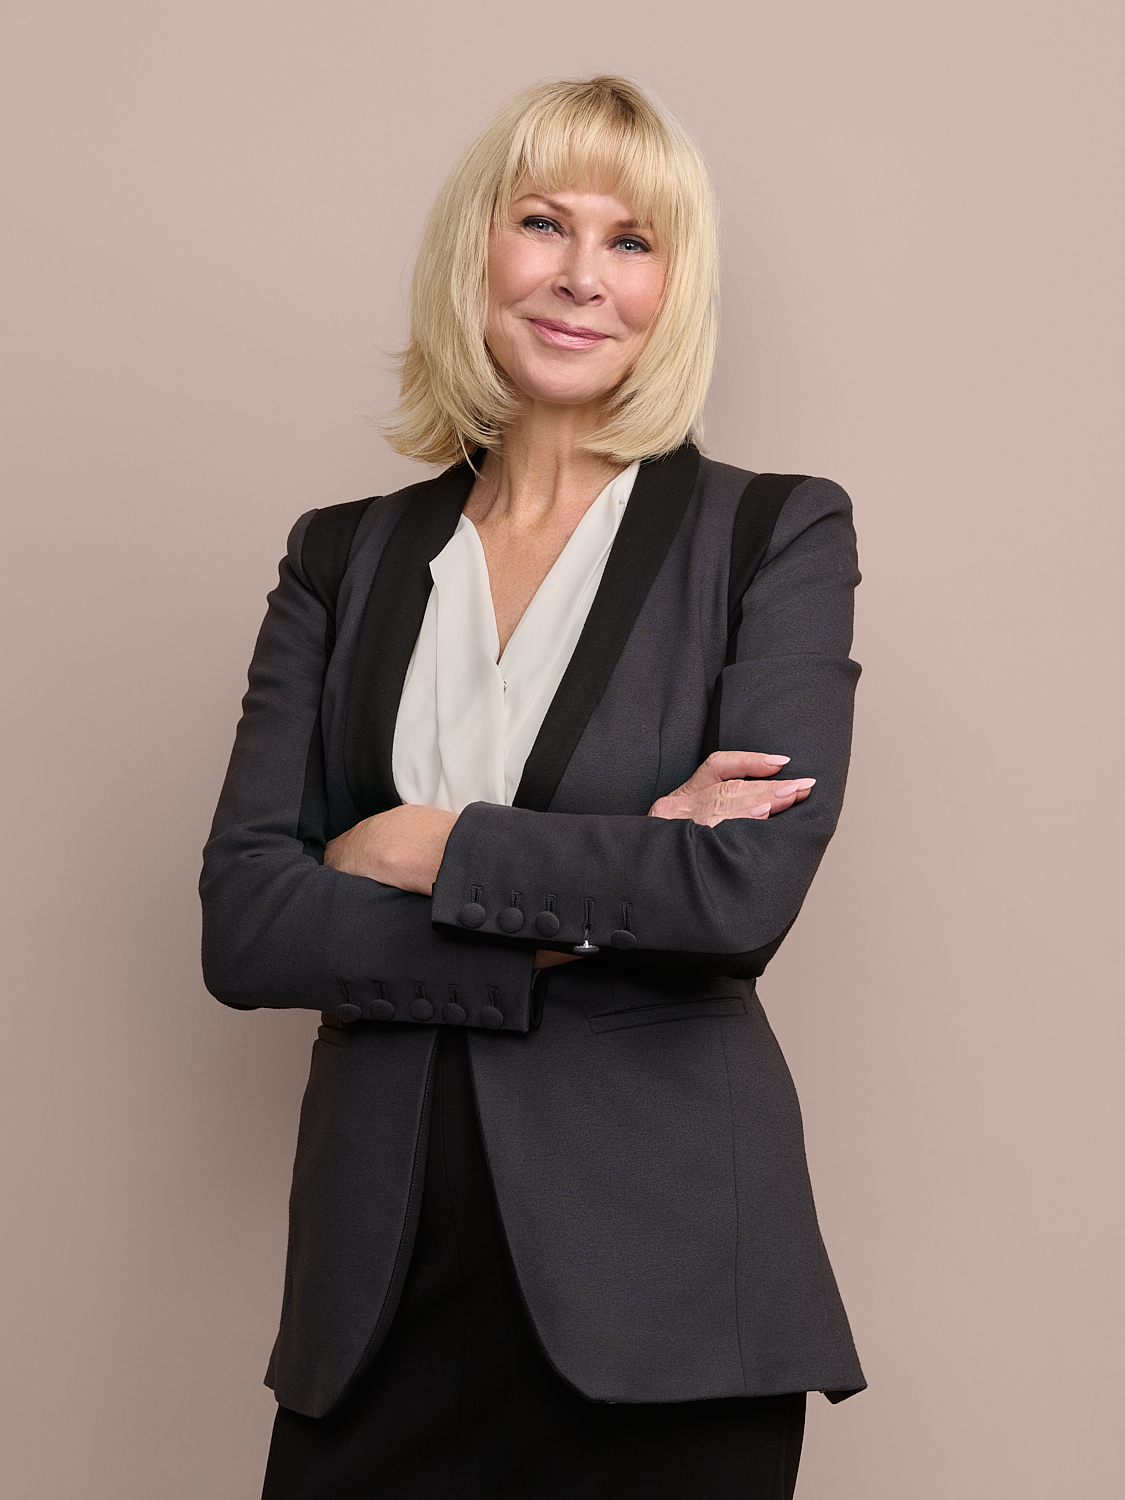 Gail Pullen Real Estate Agent